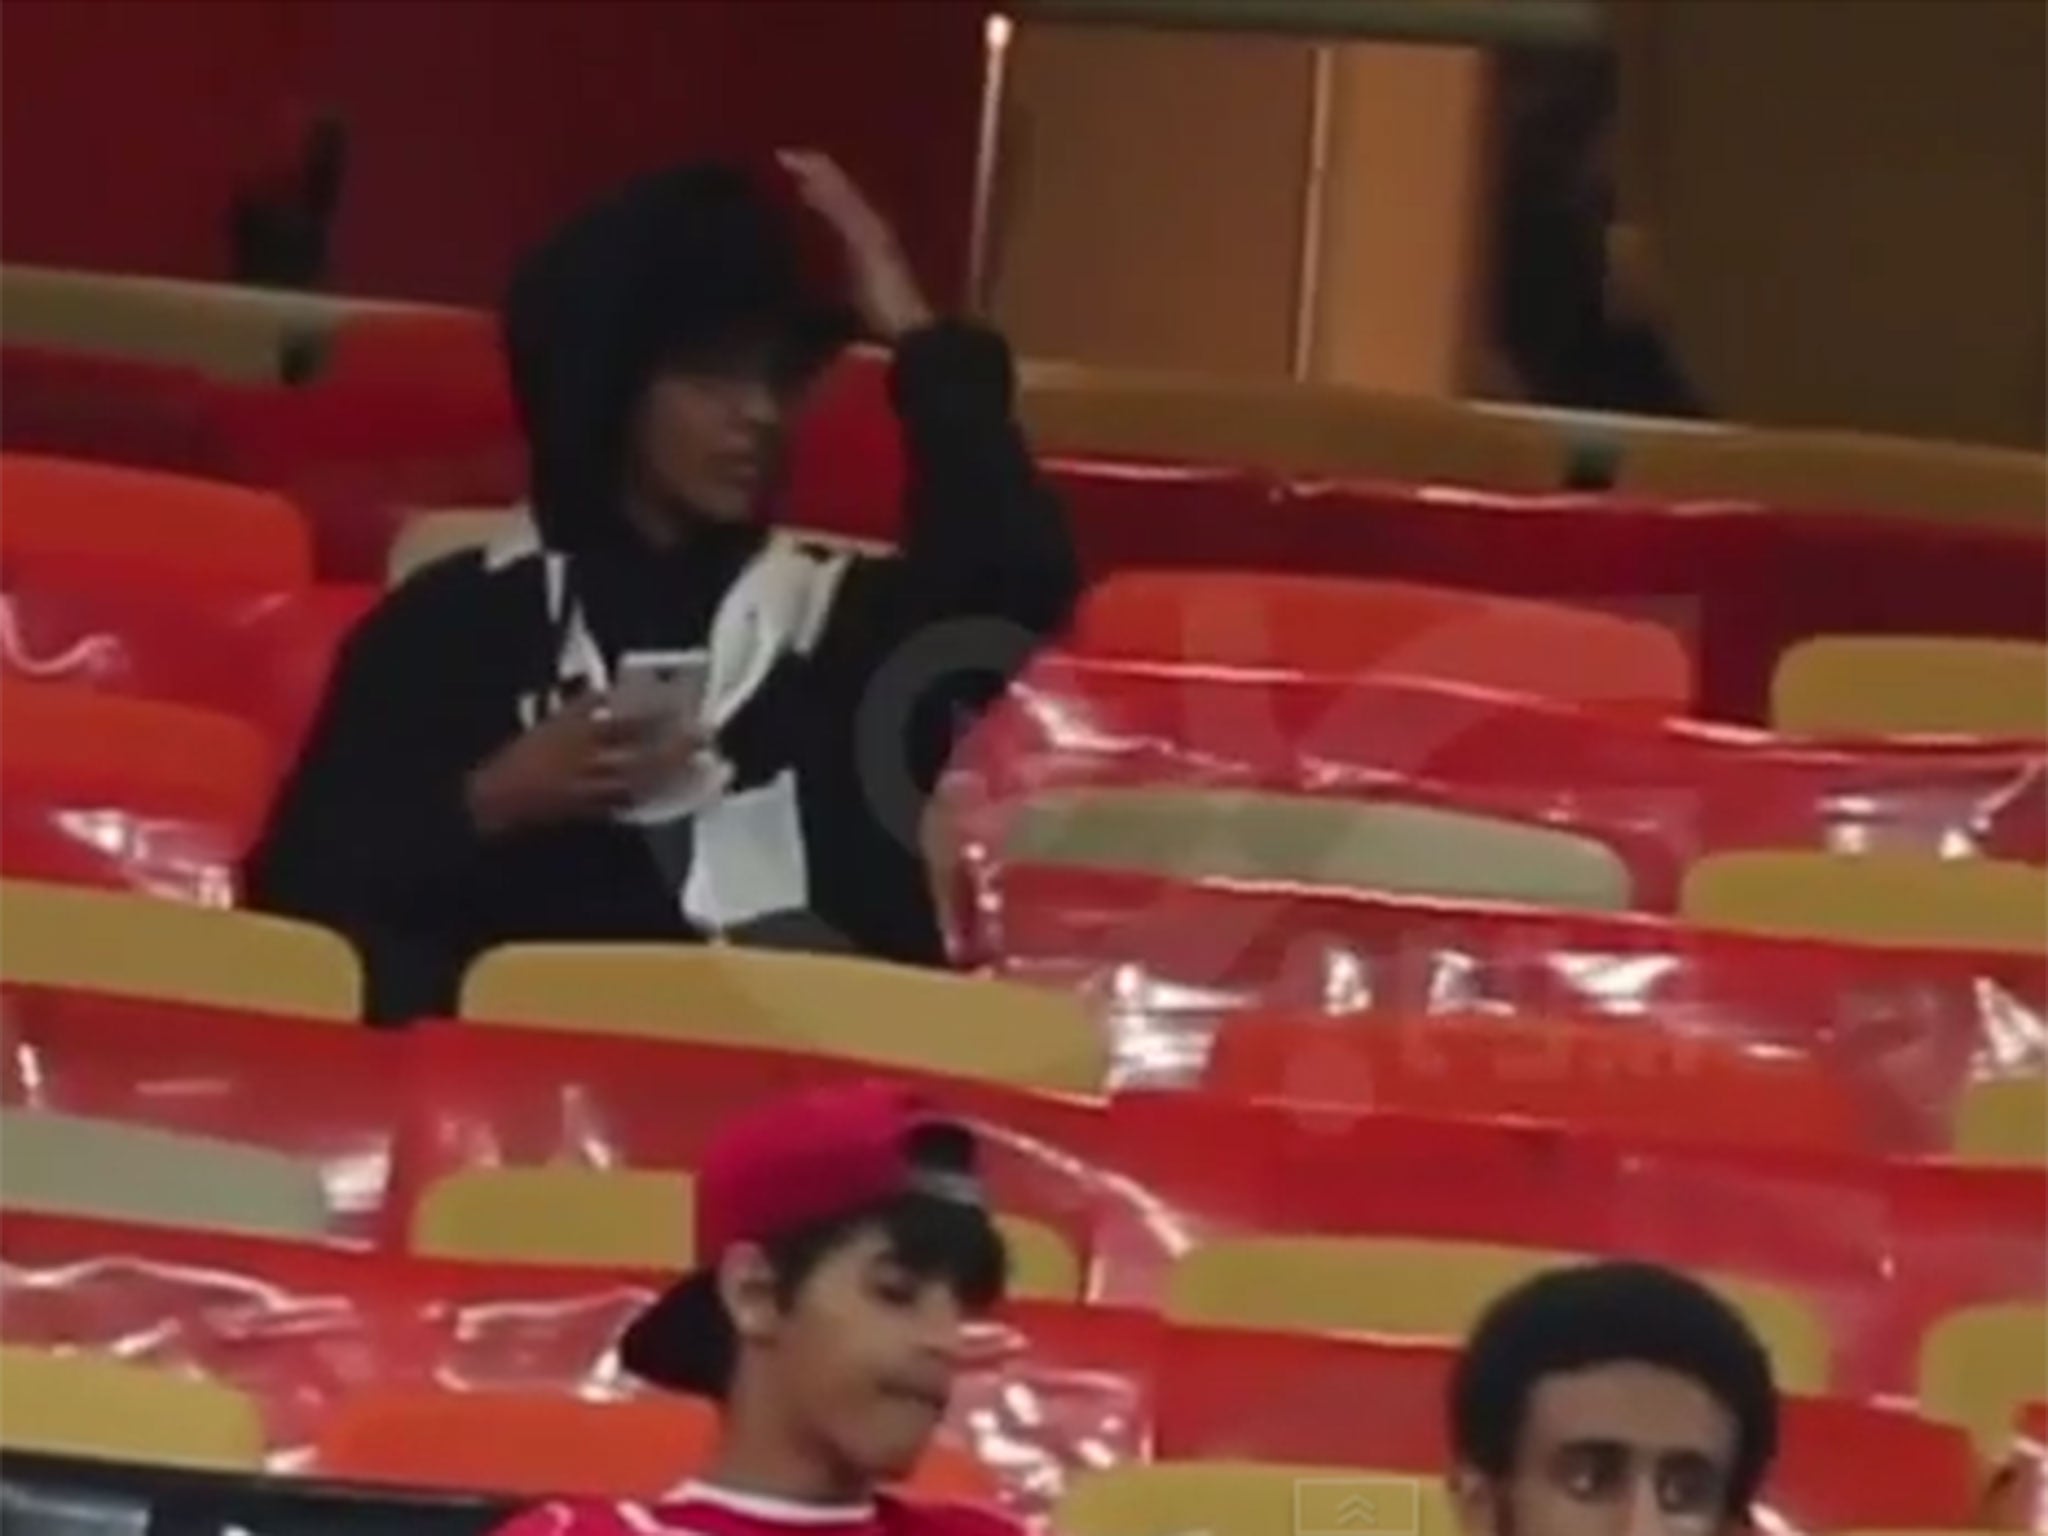 Video footage appeared to show the woman sat in the away stand of the Al-Jawhara stadium in Jeddah